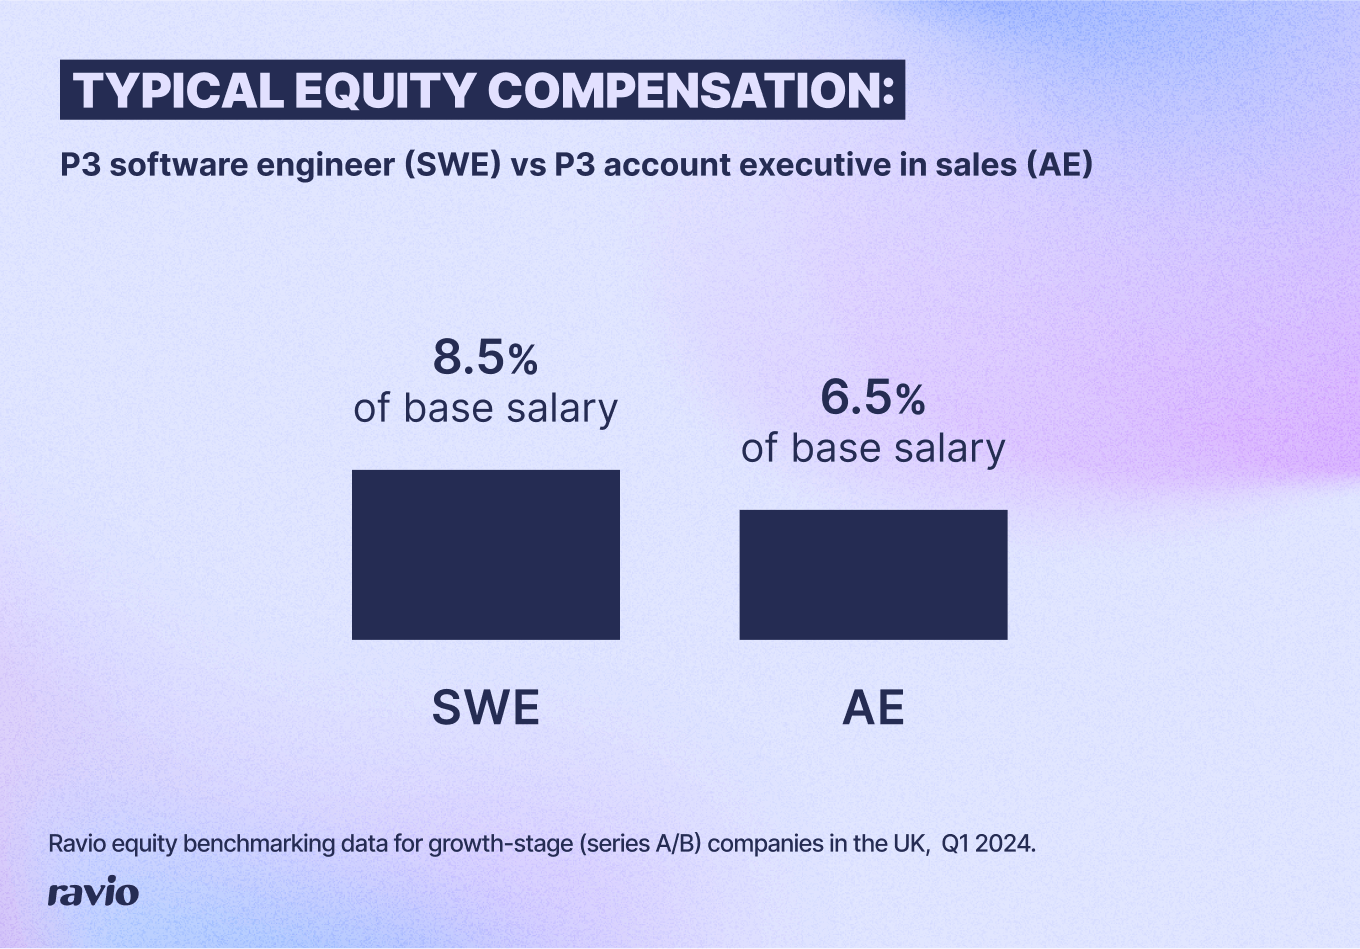 A typical equity offer for a P3 software engineer is 8.5% of base salary, whereas for a P3 account executive in sales it is 6.5% of base salary